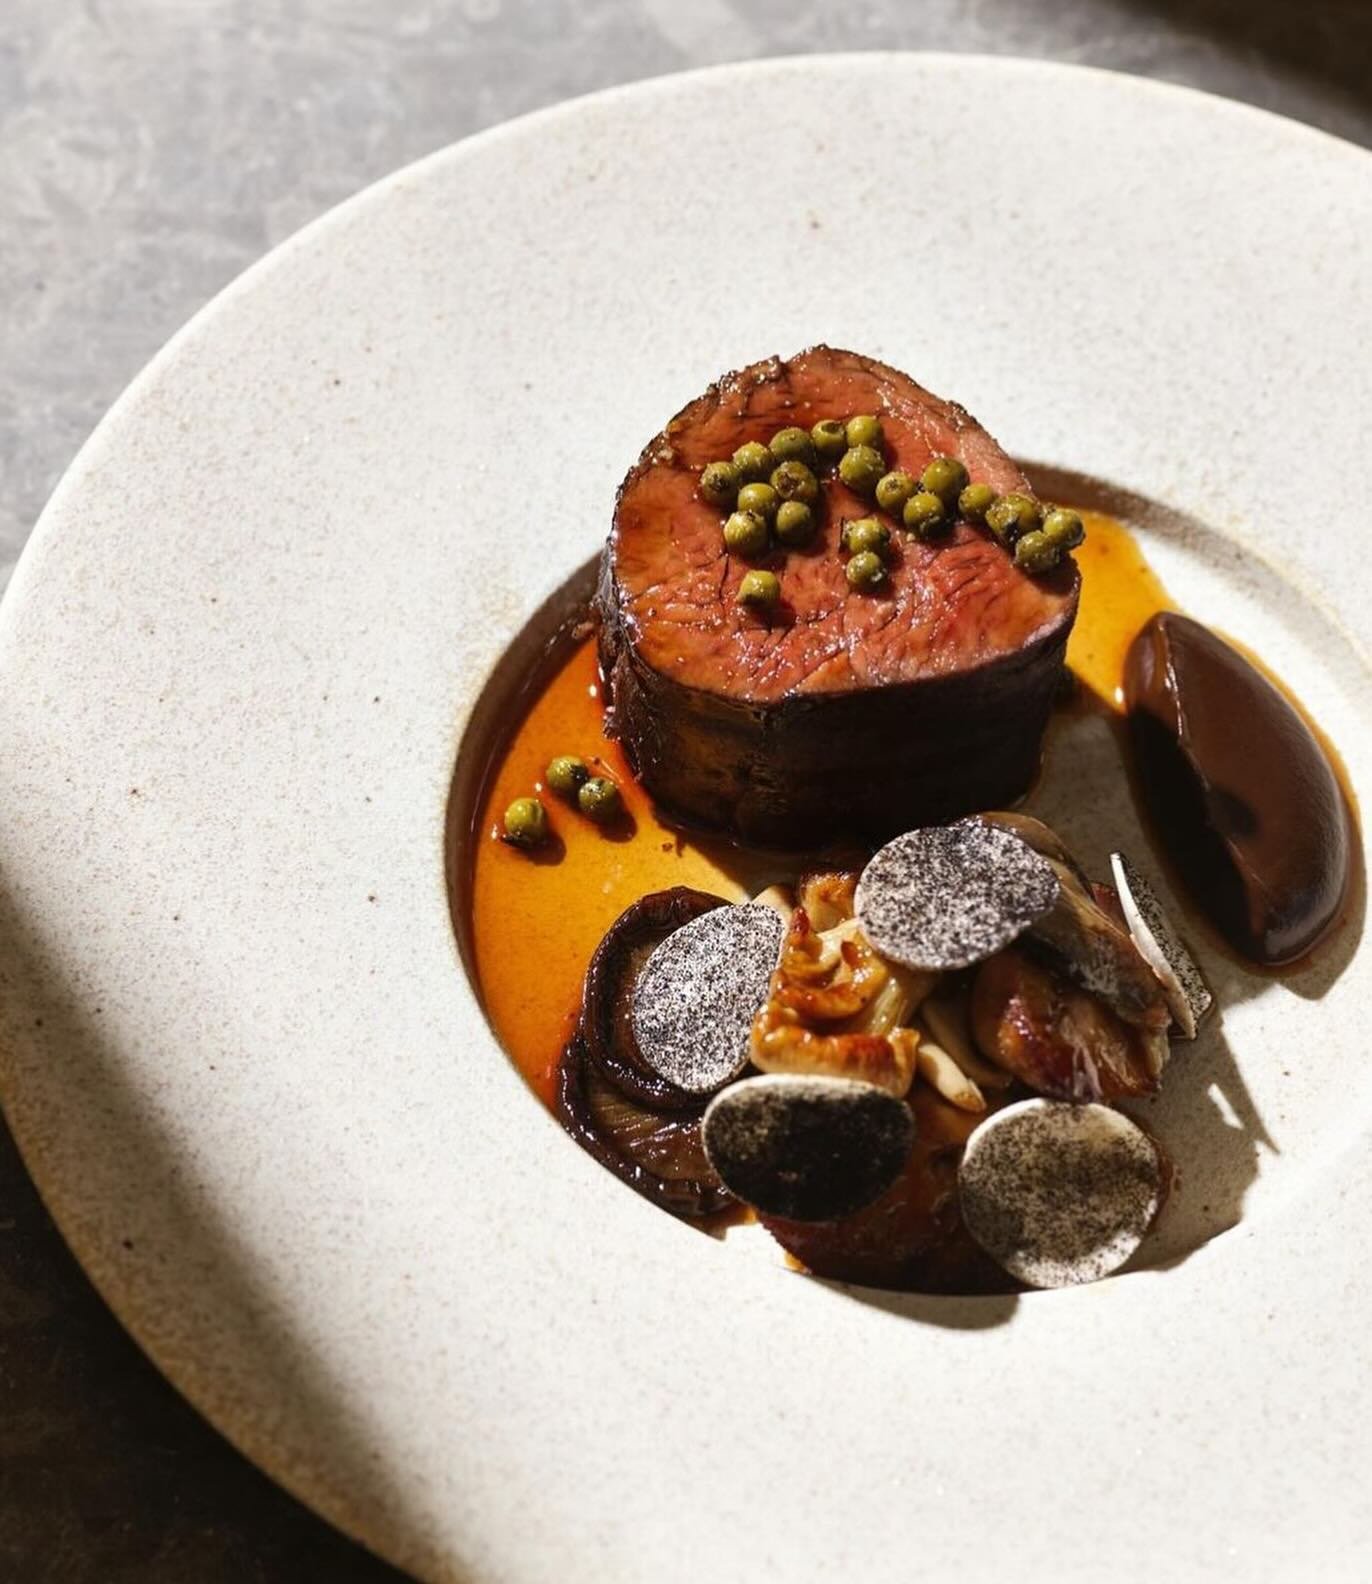 For @vividsydney book the @thediningroombyjamesviles by @chefjamesviles in the @parkhyattsydney

Enjoy the @oconnorbeef tenderloin + unearthed mushrooms + kampot pepper sauce whilst you marvel at the extraordinary handmade textures of the @julia__gut